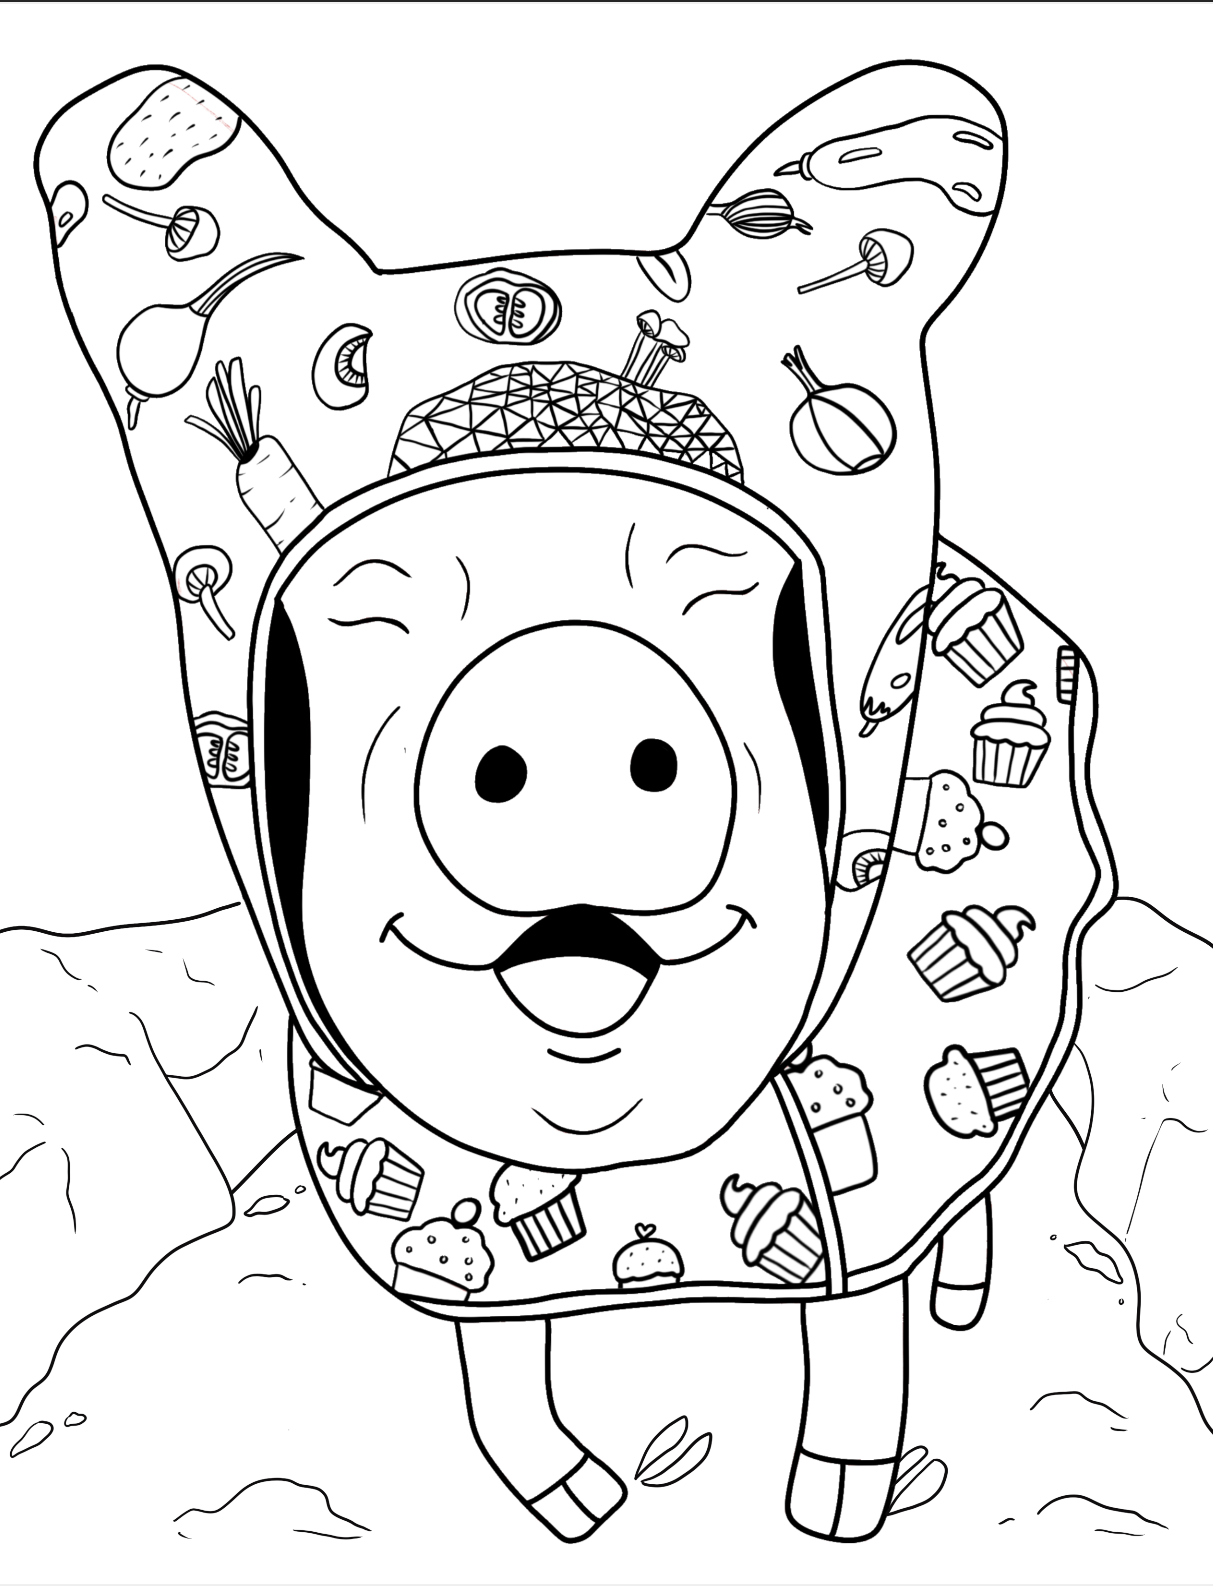 NEW- Esther The Wonder Pig- Colouring book/ With Rainbow Ornament